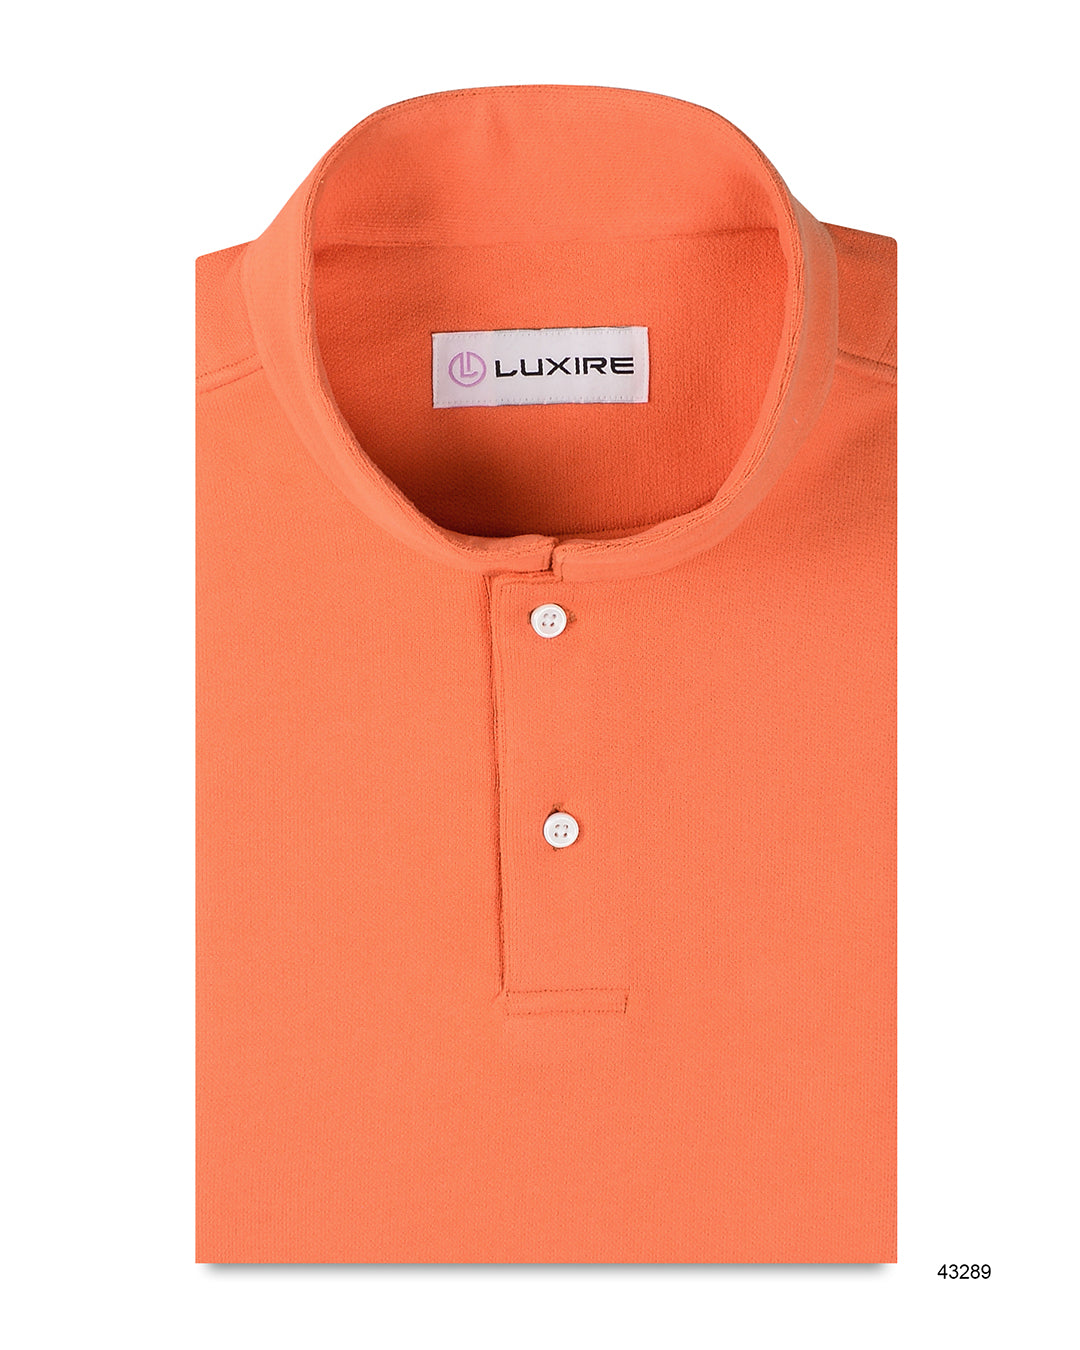 Front of the custom oxford polo shirt for men by Luxire in bright orange